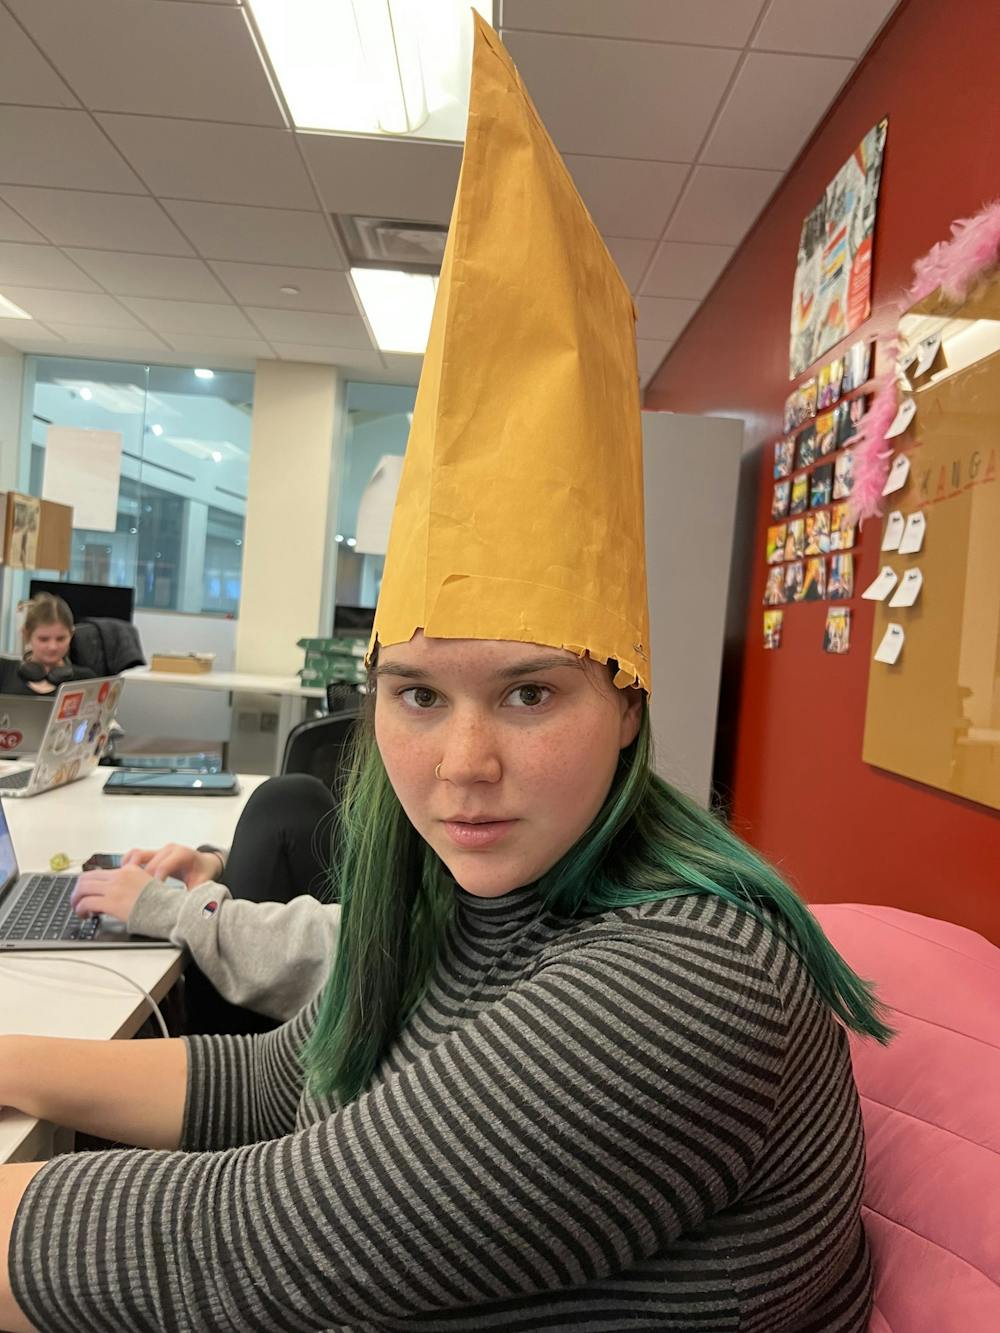 <p>Outgoing Entertainment editor Maggie Peña will miss all the friends she&#x27;s made at The Miami Student, and all the fun times they have together (including this manila envelope hat).</p>